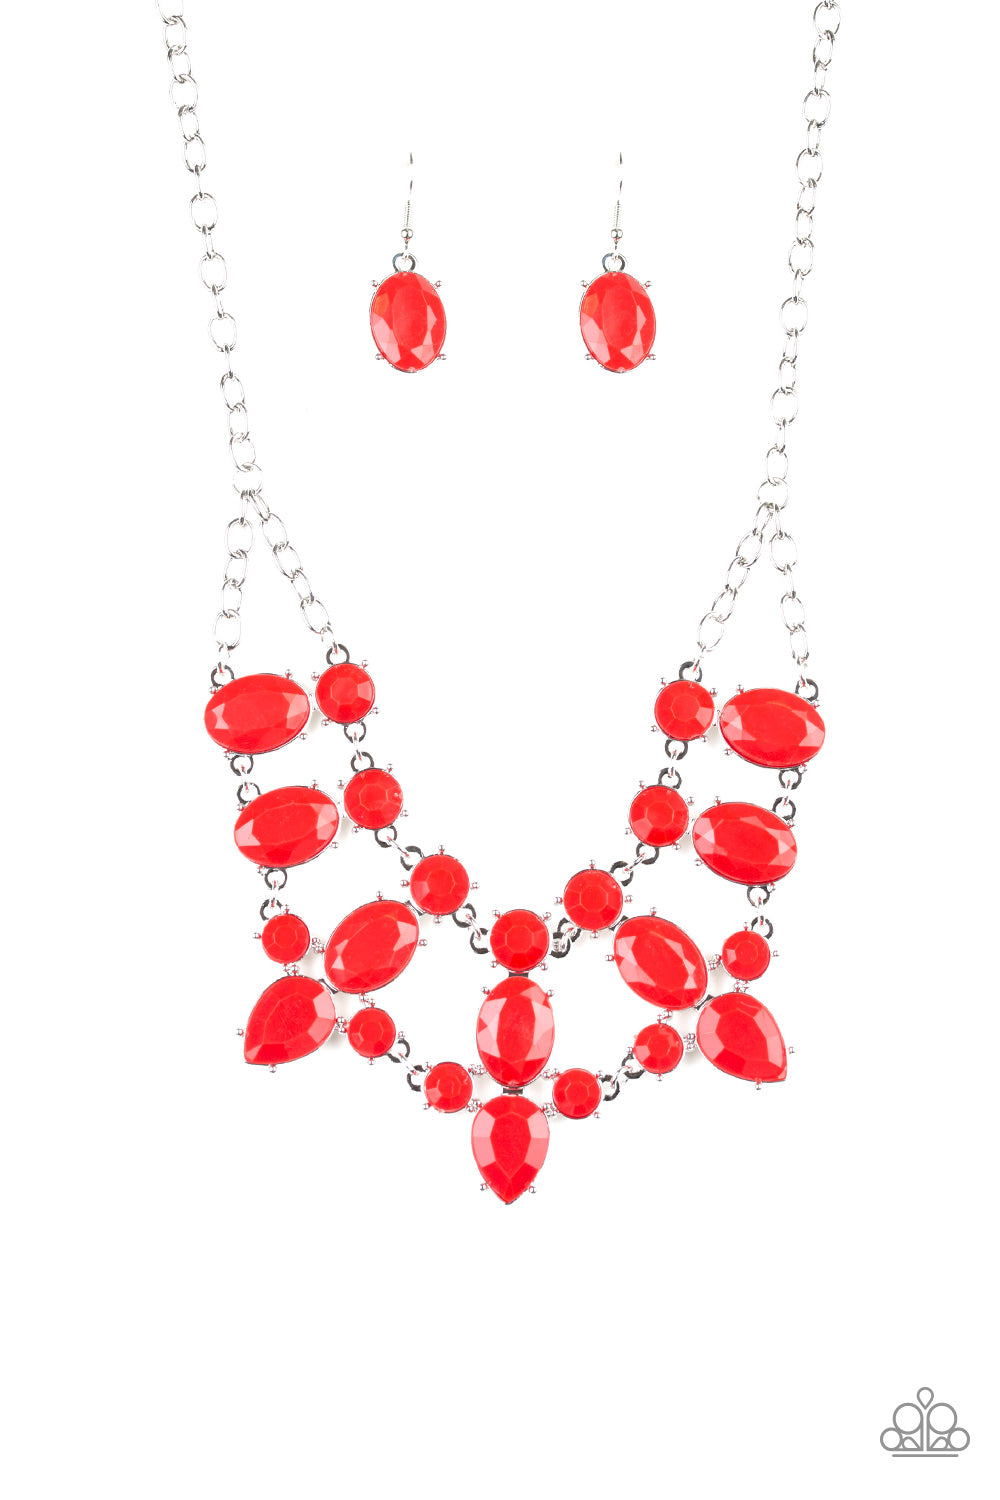 Paparazzi Accessories - Goddess Glow - Red Necklace - Alies Bling Bar